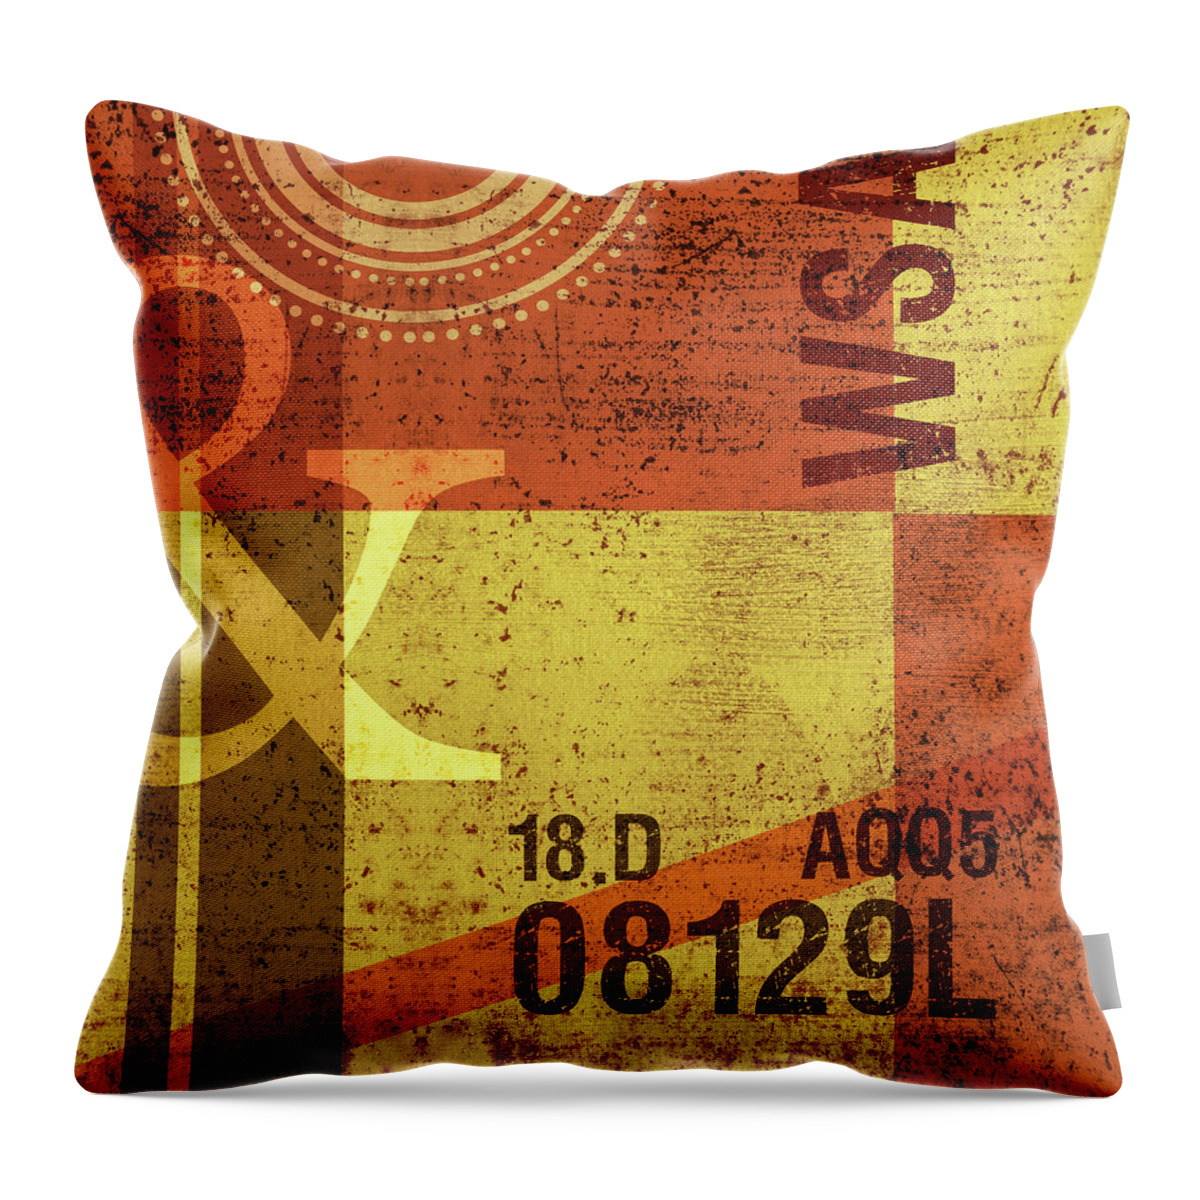 Abstract Throw Pillow featuring the mixed media Contemporary Abstract Industrial Art - Distressed Metal - Olive Yellow and Orange by Studio Grafiikka